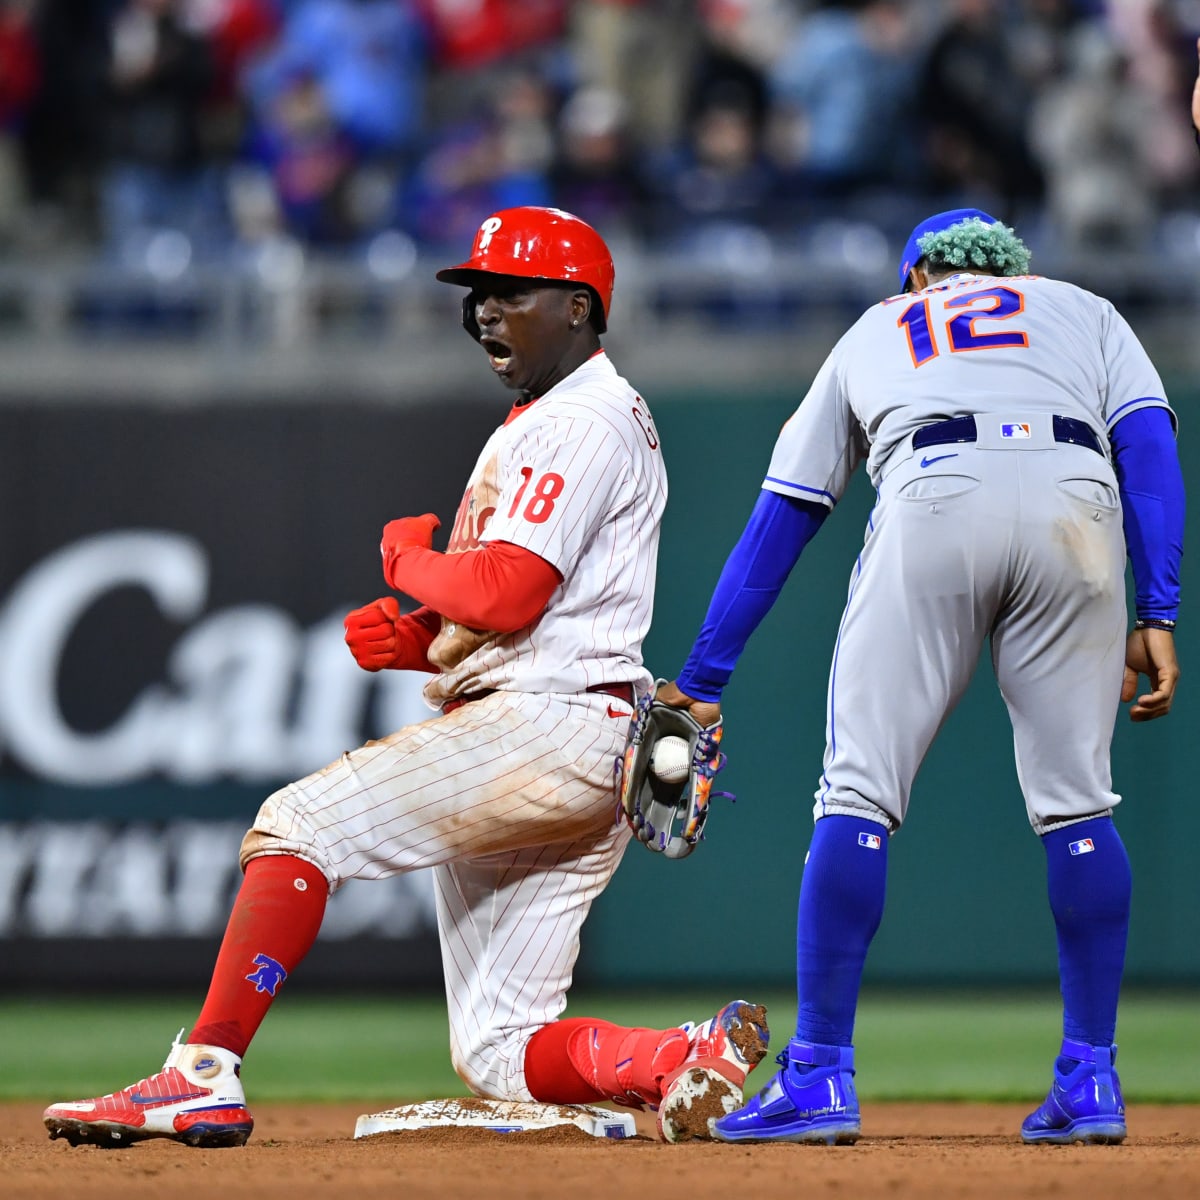 Philadelphia Phillies shortstop Didi Gregorious hit a homer with a backup  helmet and bat